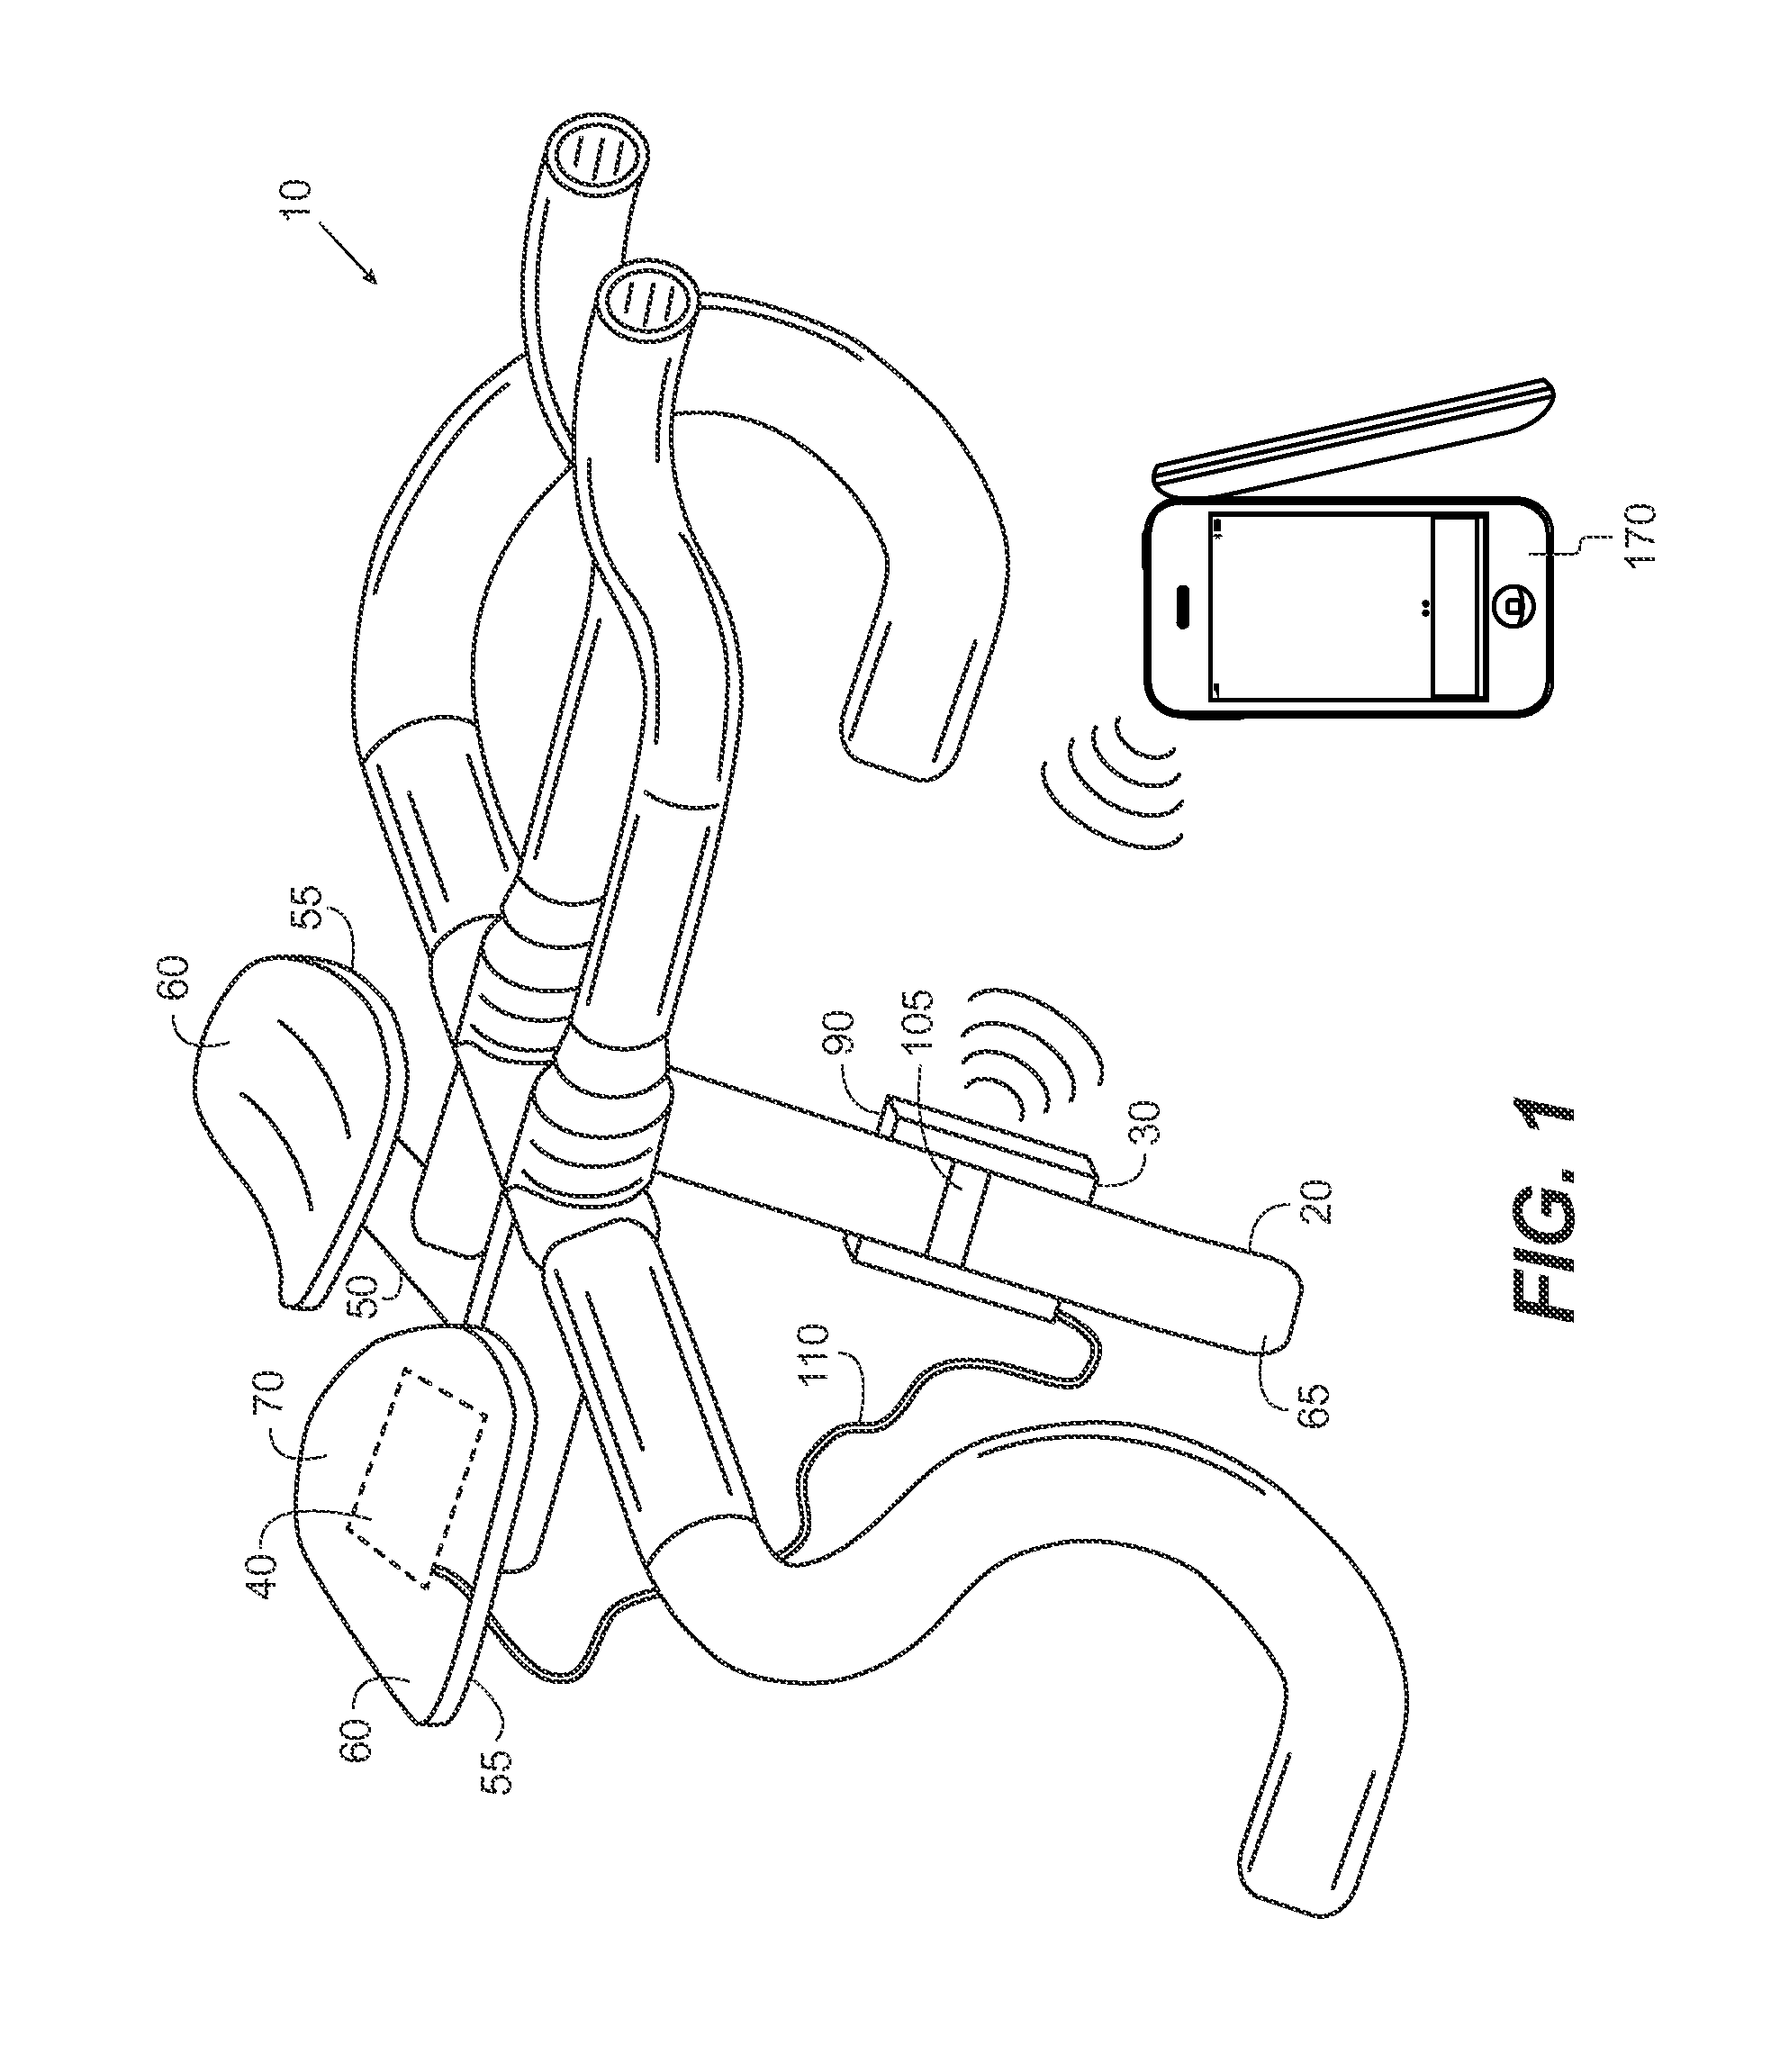 Sensor and feedback assembly for a bicycle